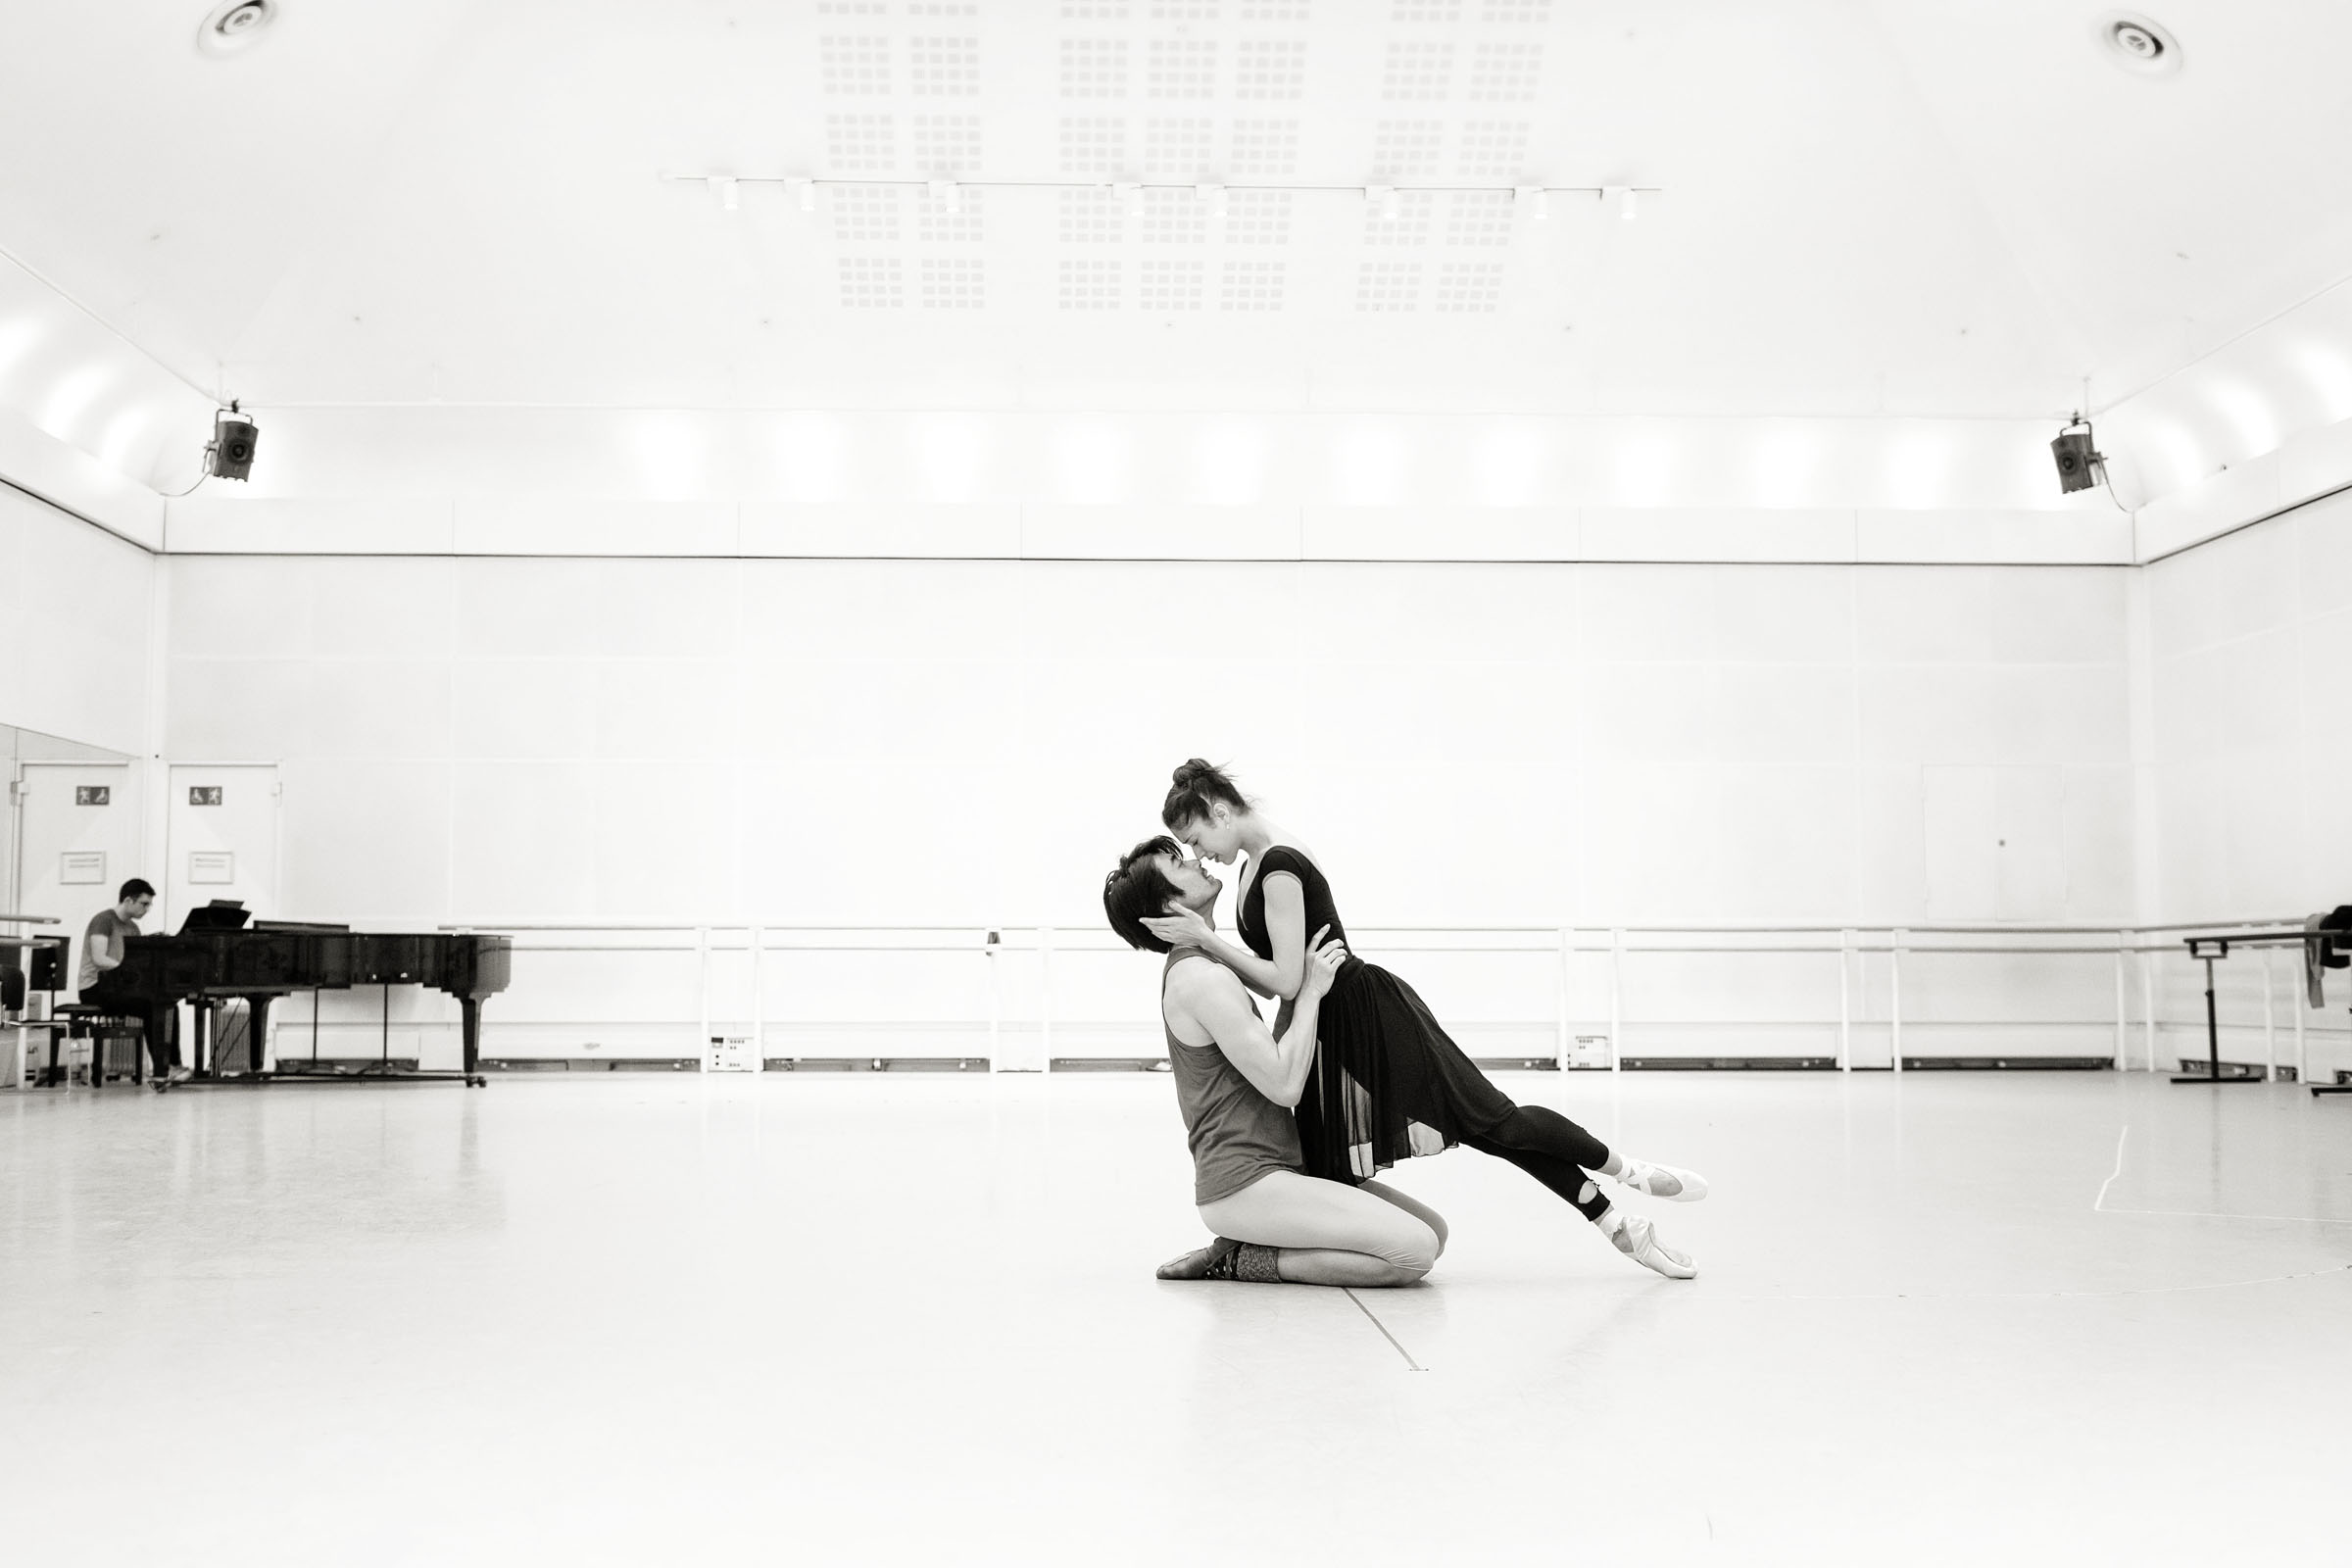 Ryoichi Hirano and Beatriz Stix-Brunell in rehearsal for Romeo and Juliet.